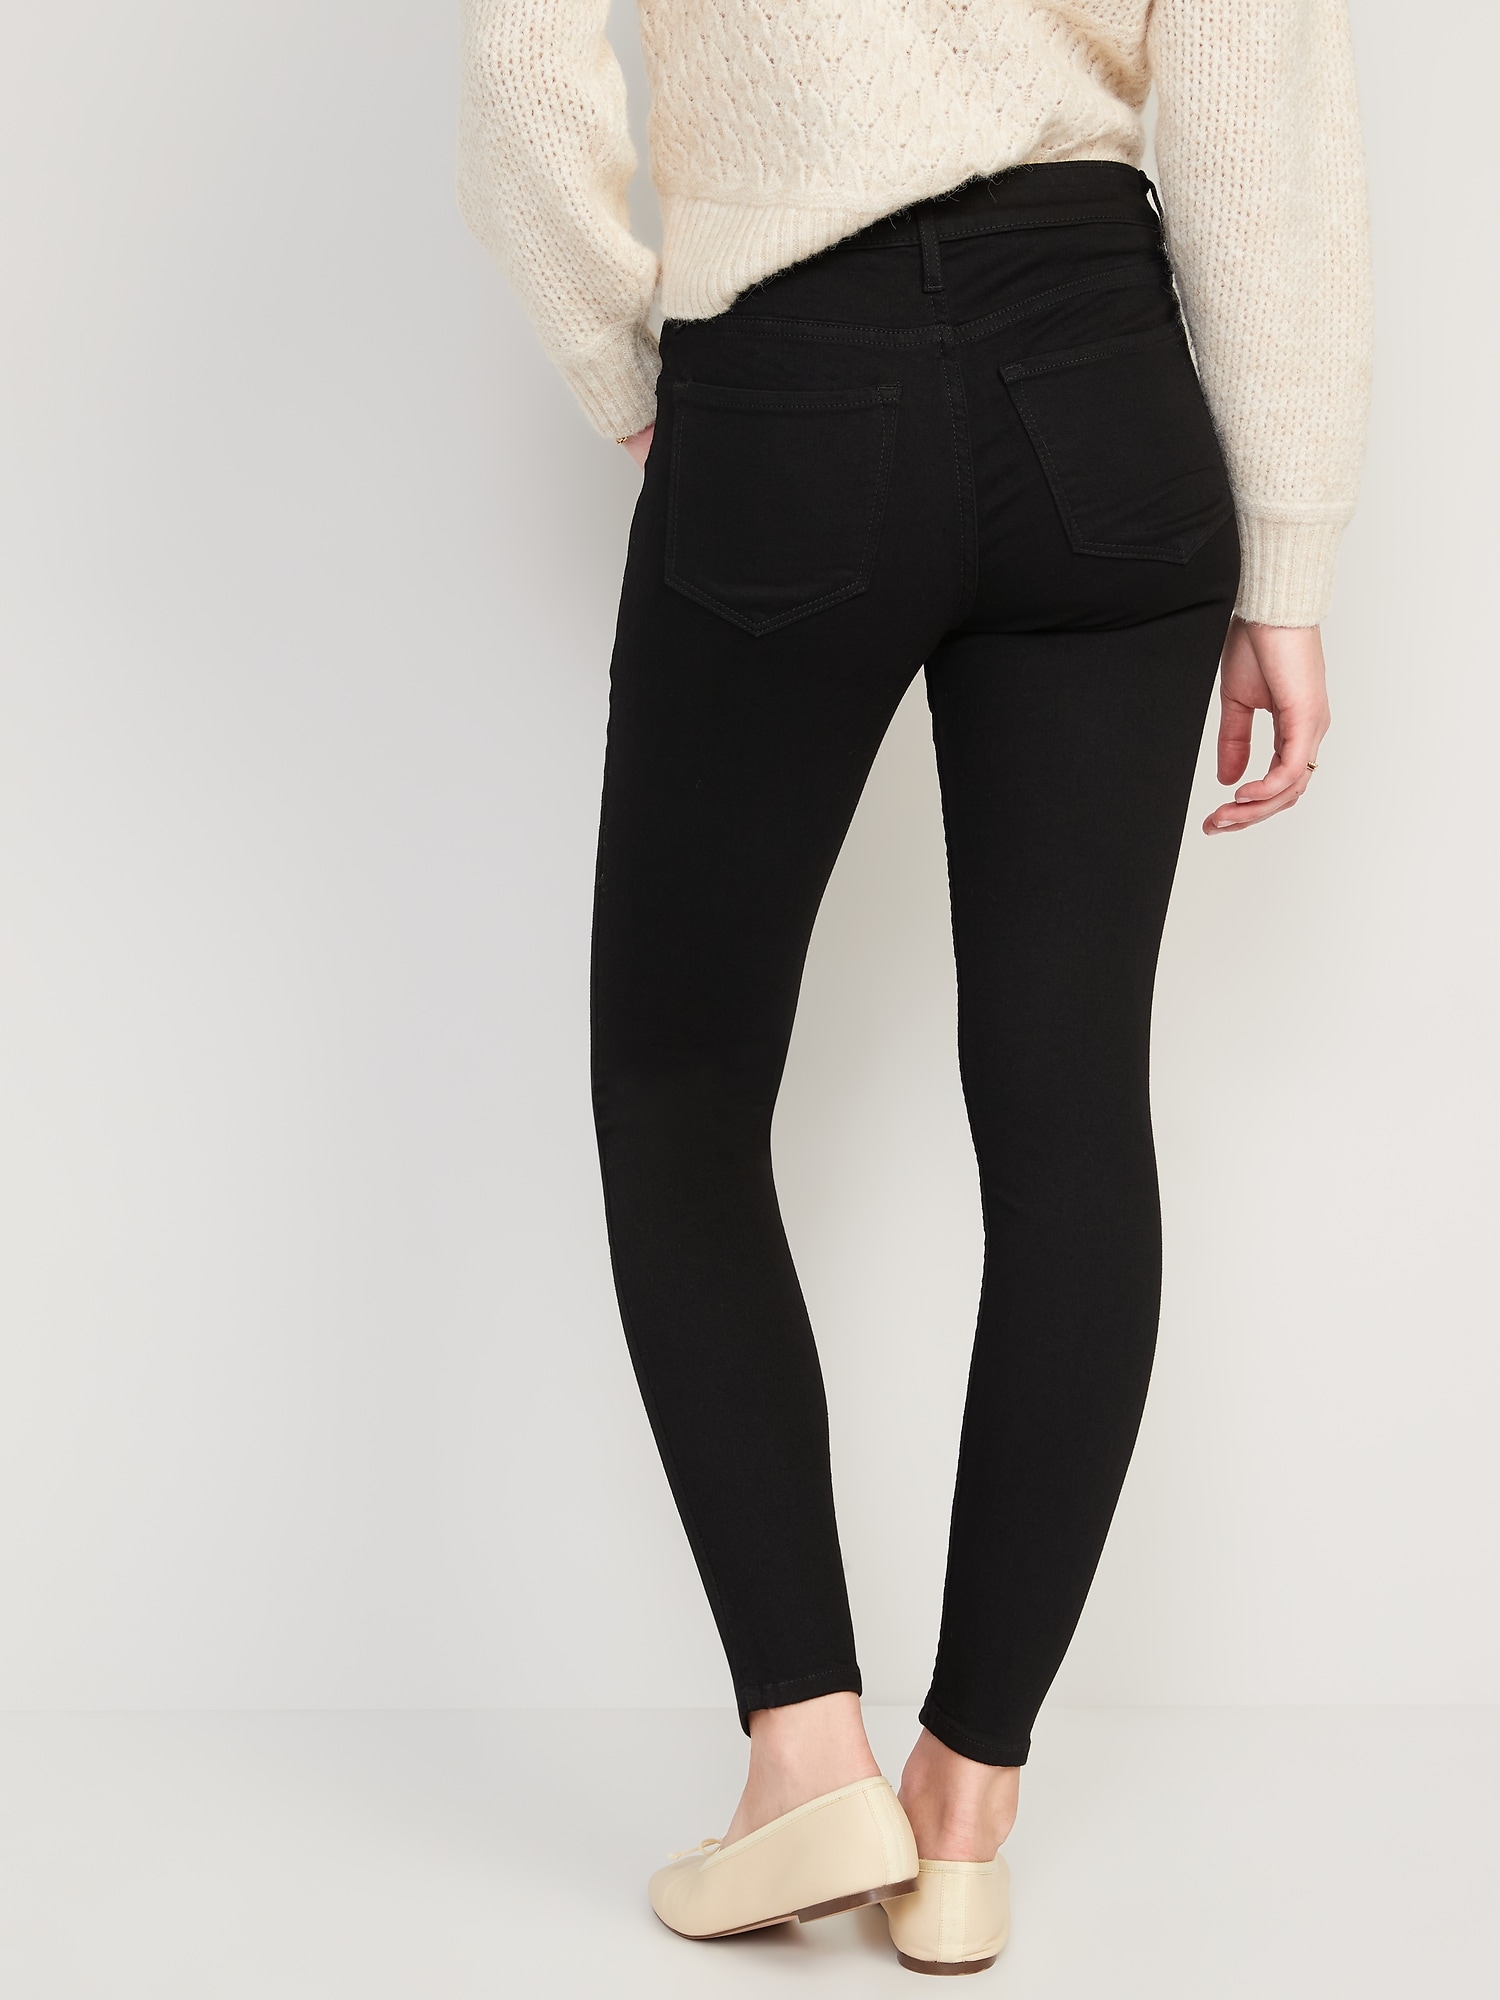 Mid-Rise Rockstar Super-Skinny Jeans for Women | Old Navy